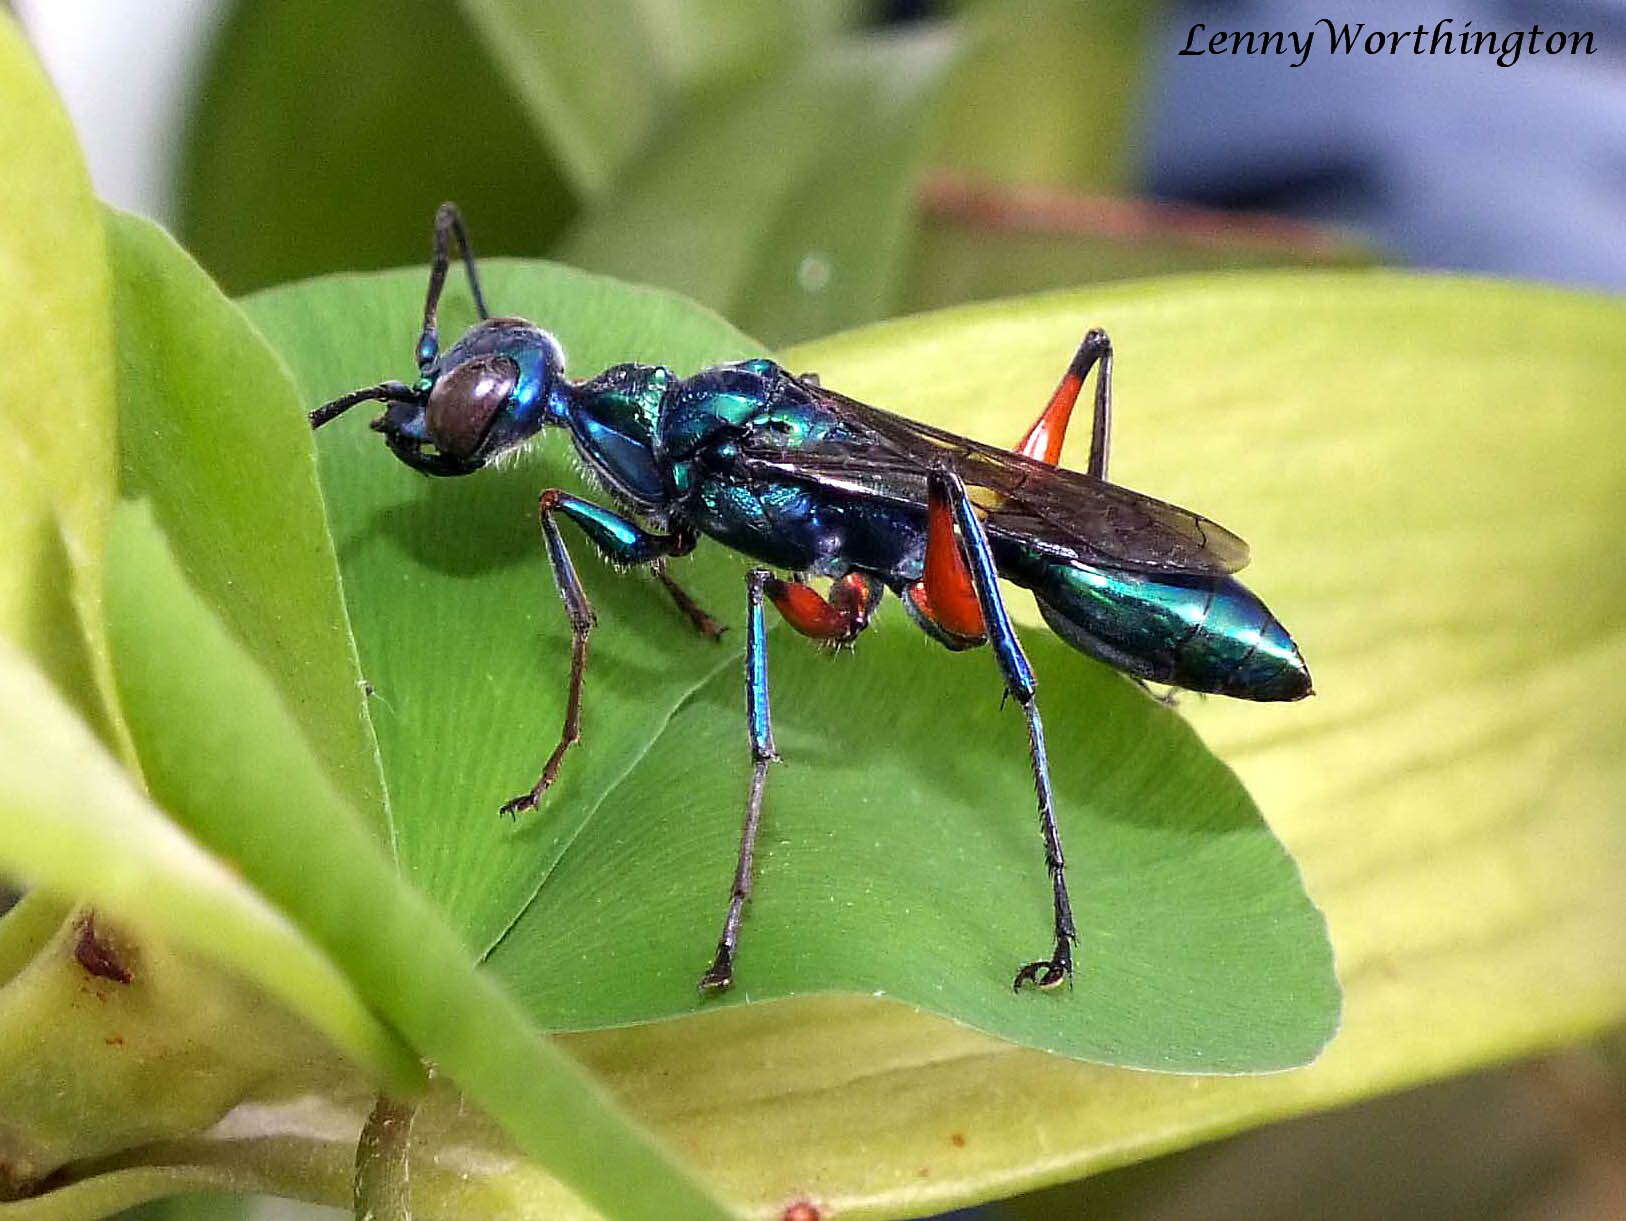 Image of Emerald cockroach wasp